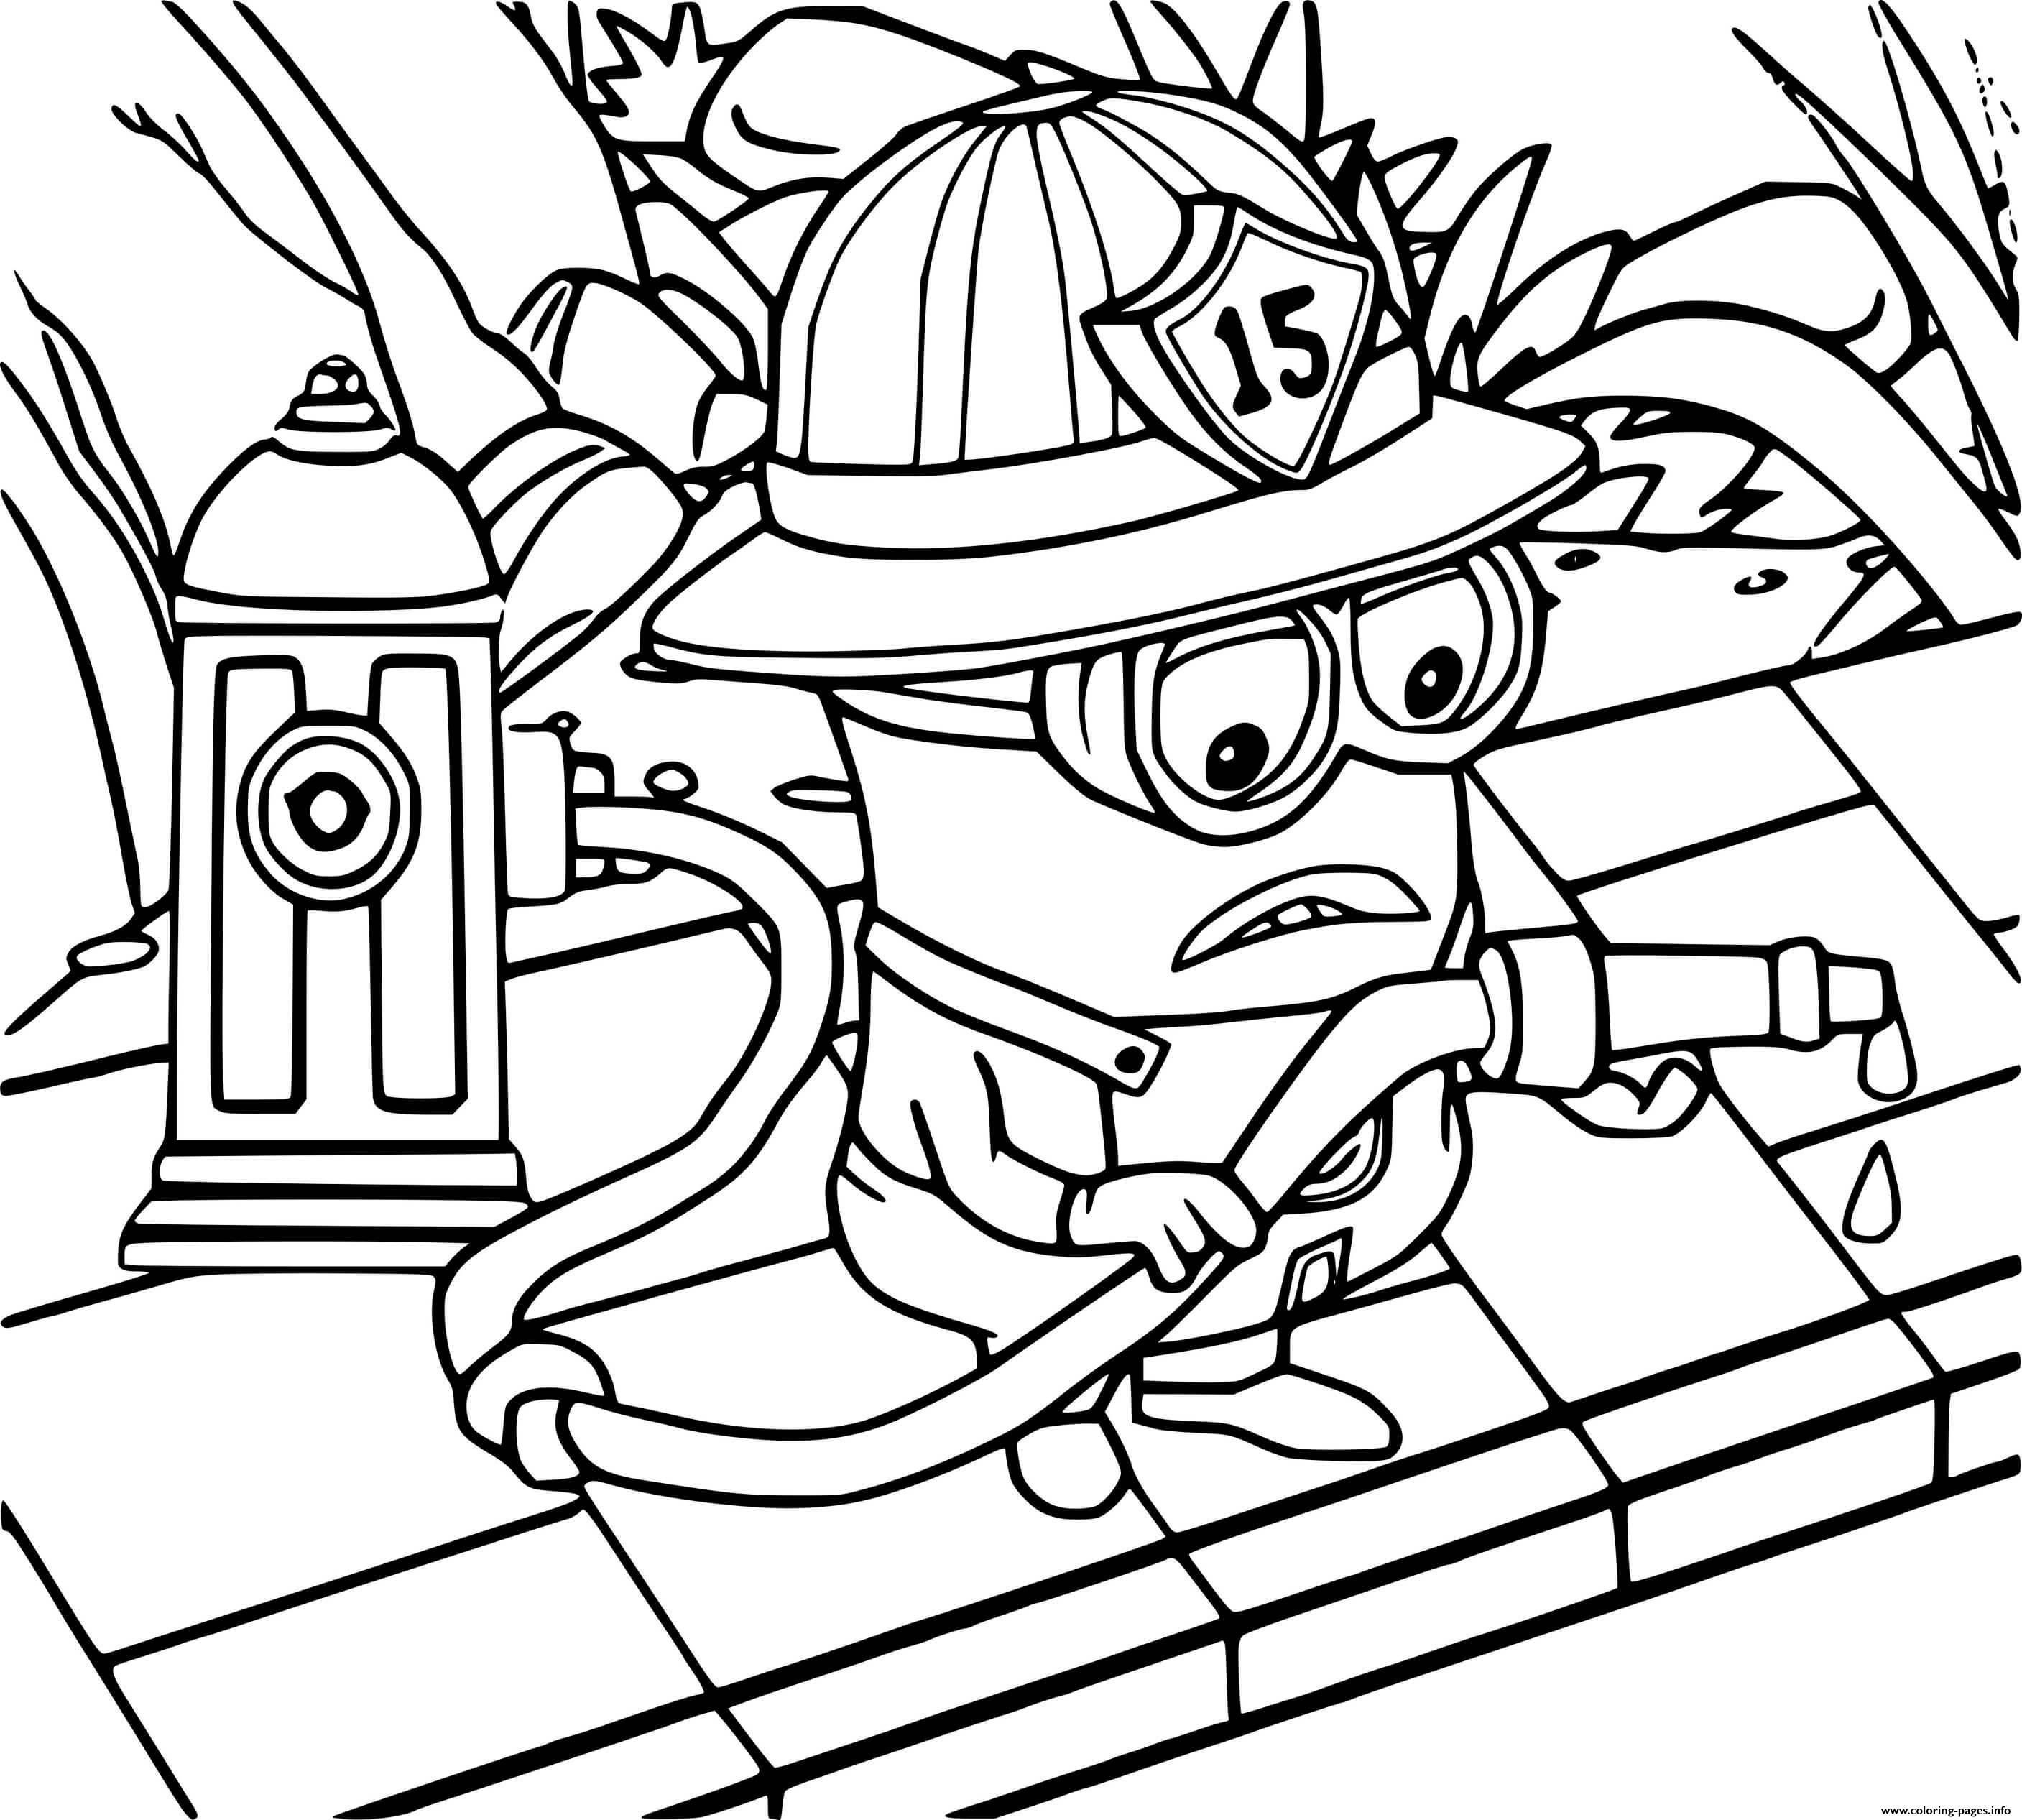 Firefighter Minion coloring